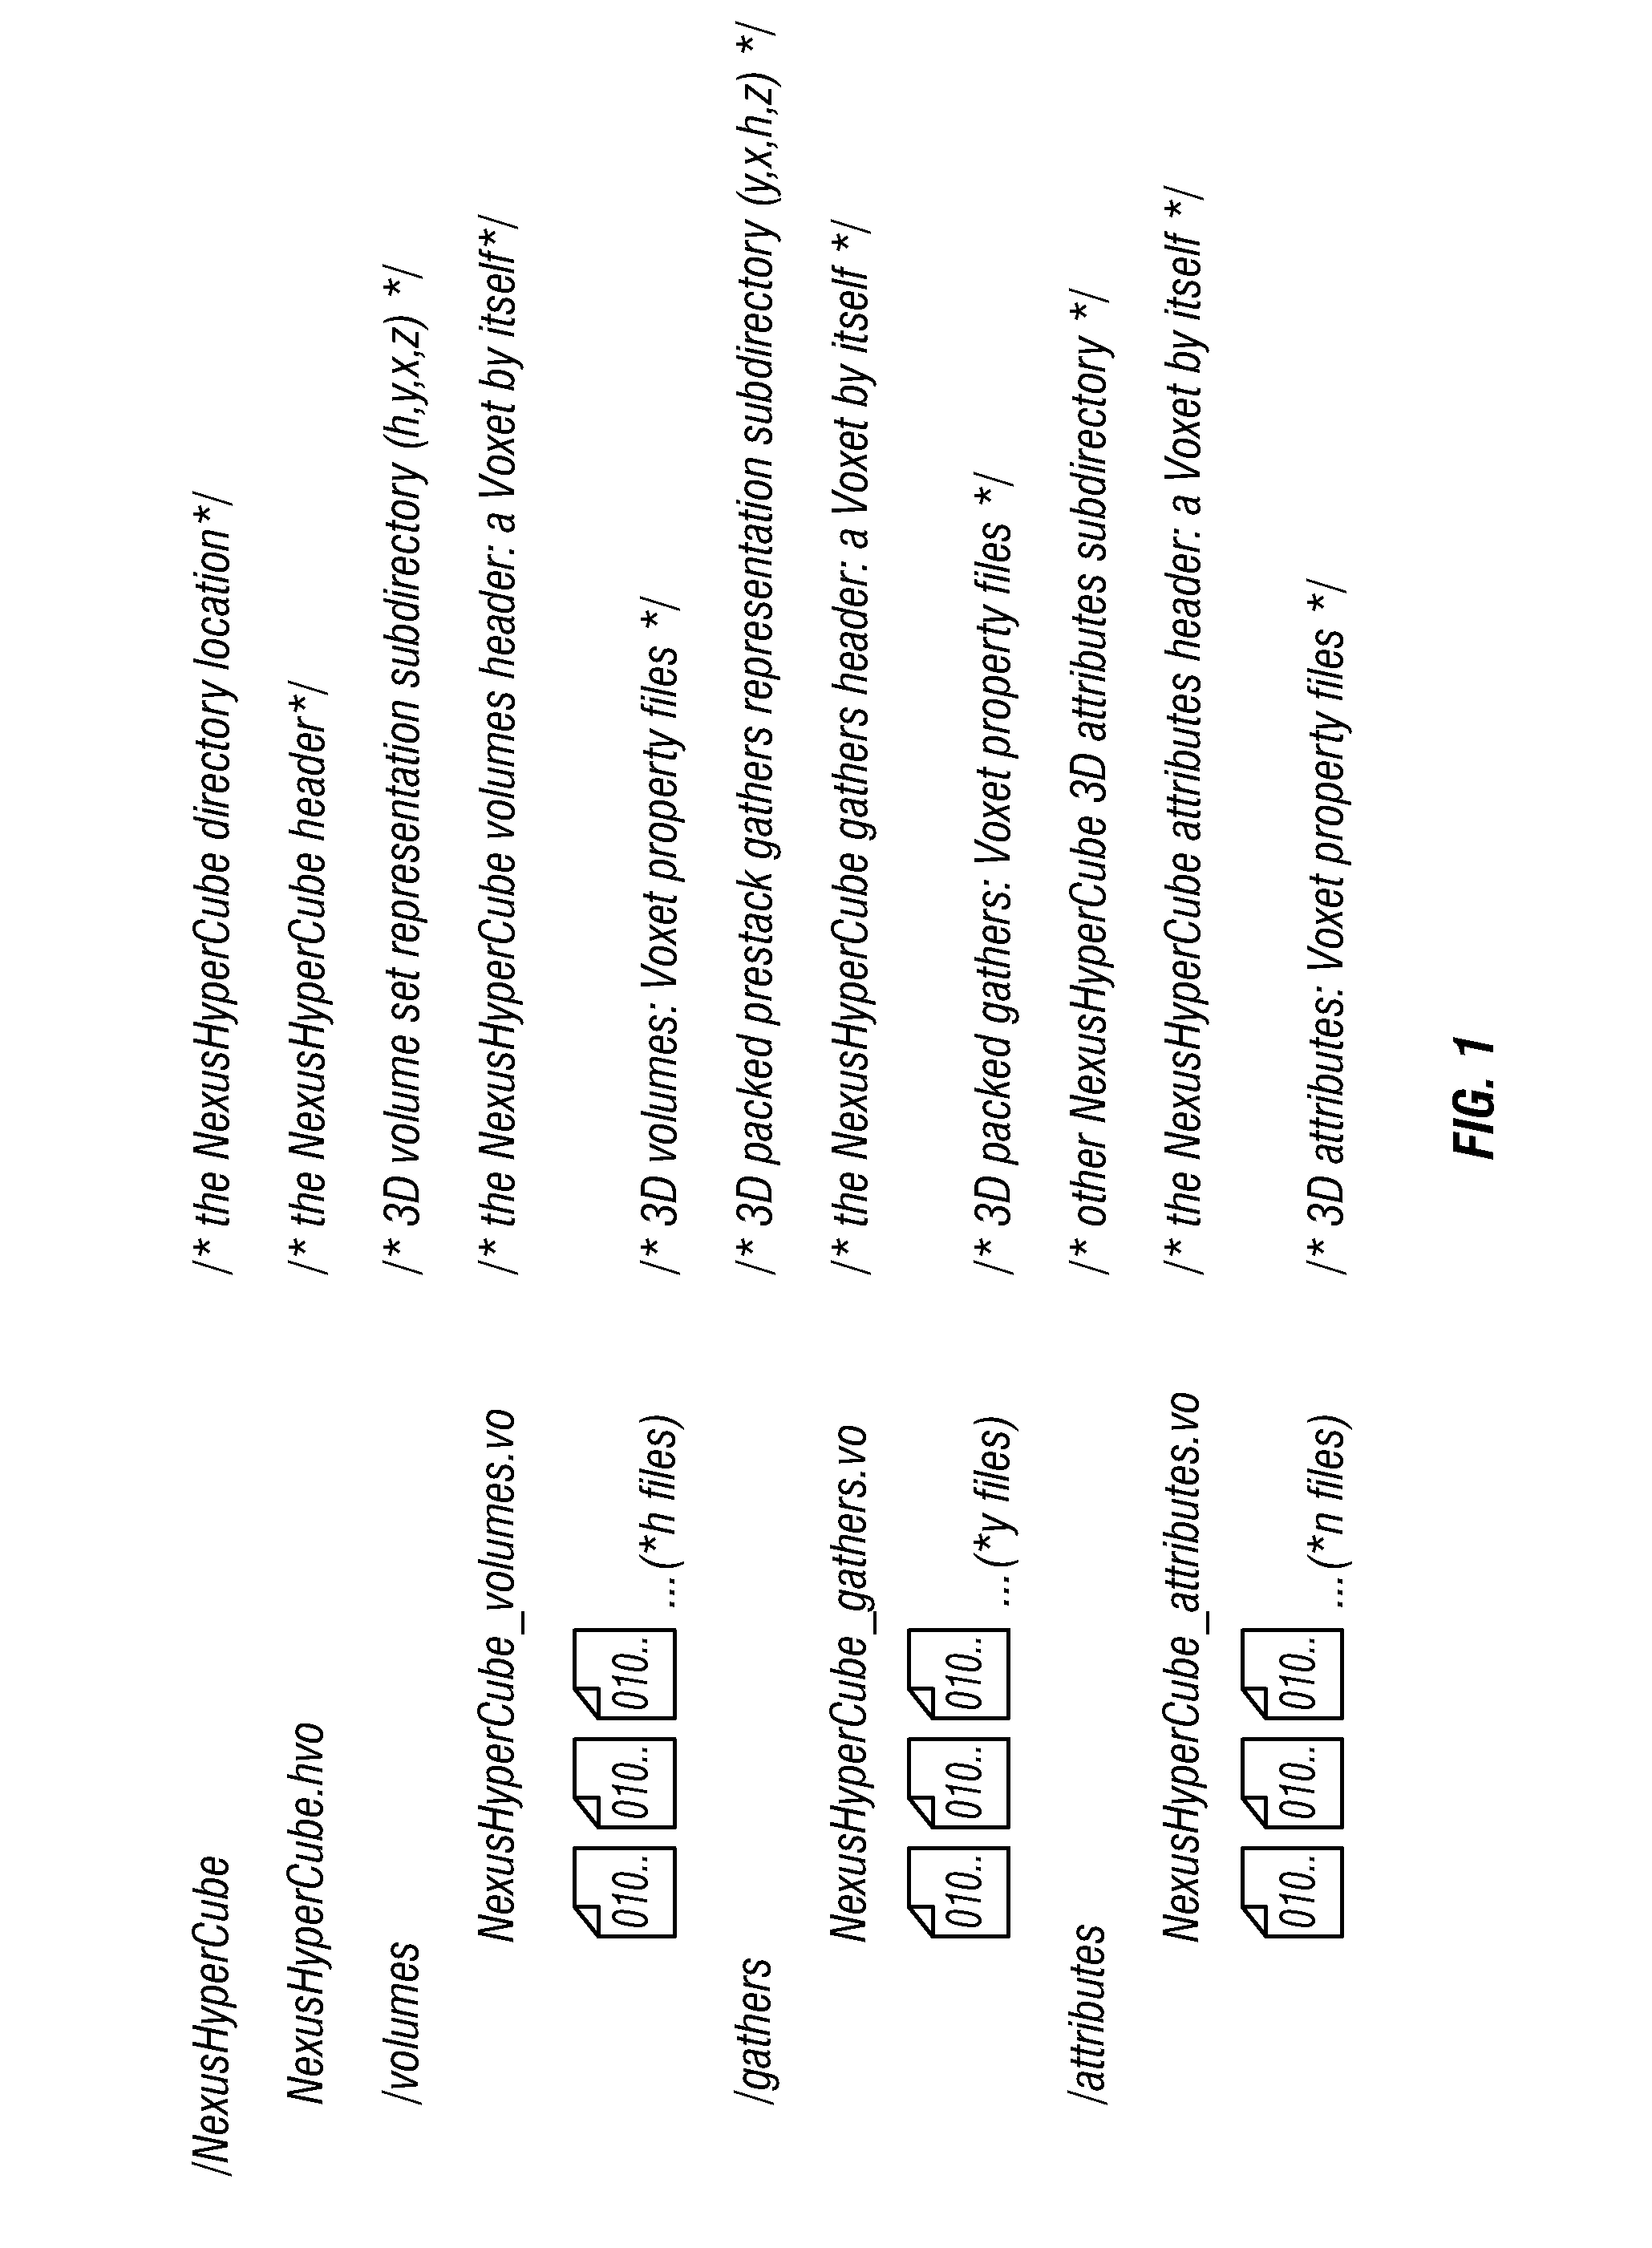 4d+ prestack seismic data structure, and methods and apparatus for processing 4d+ prestack seismic data